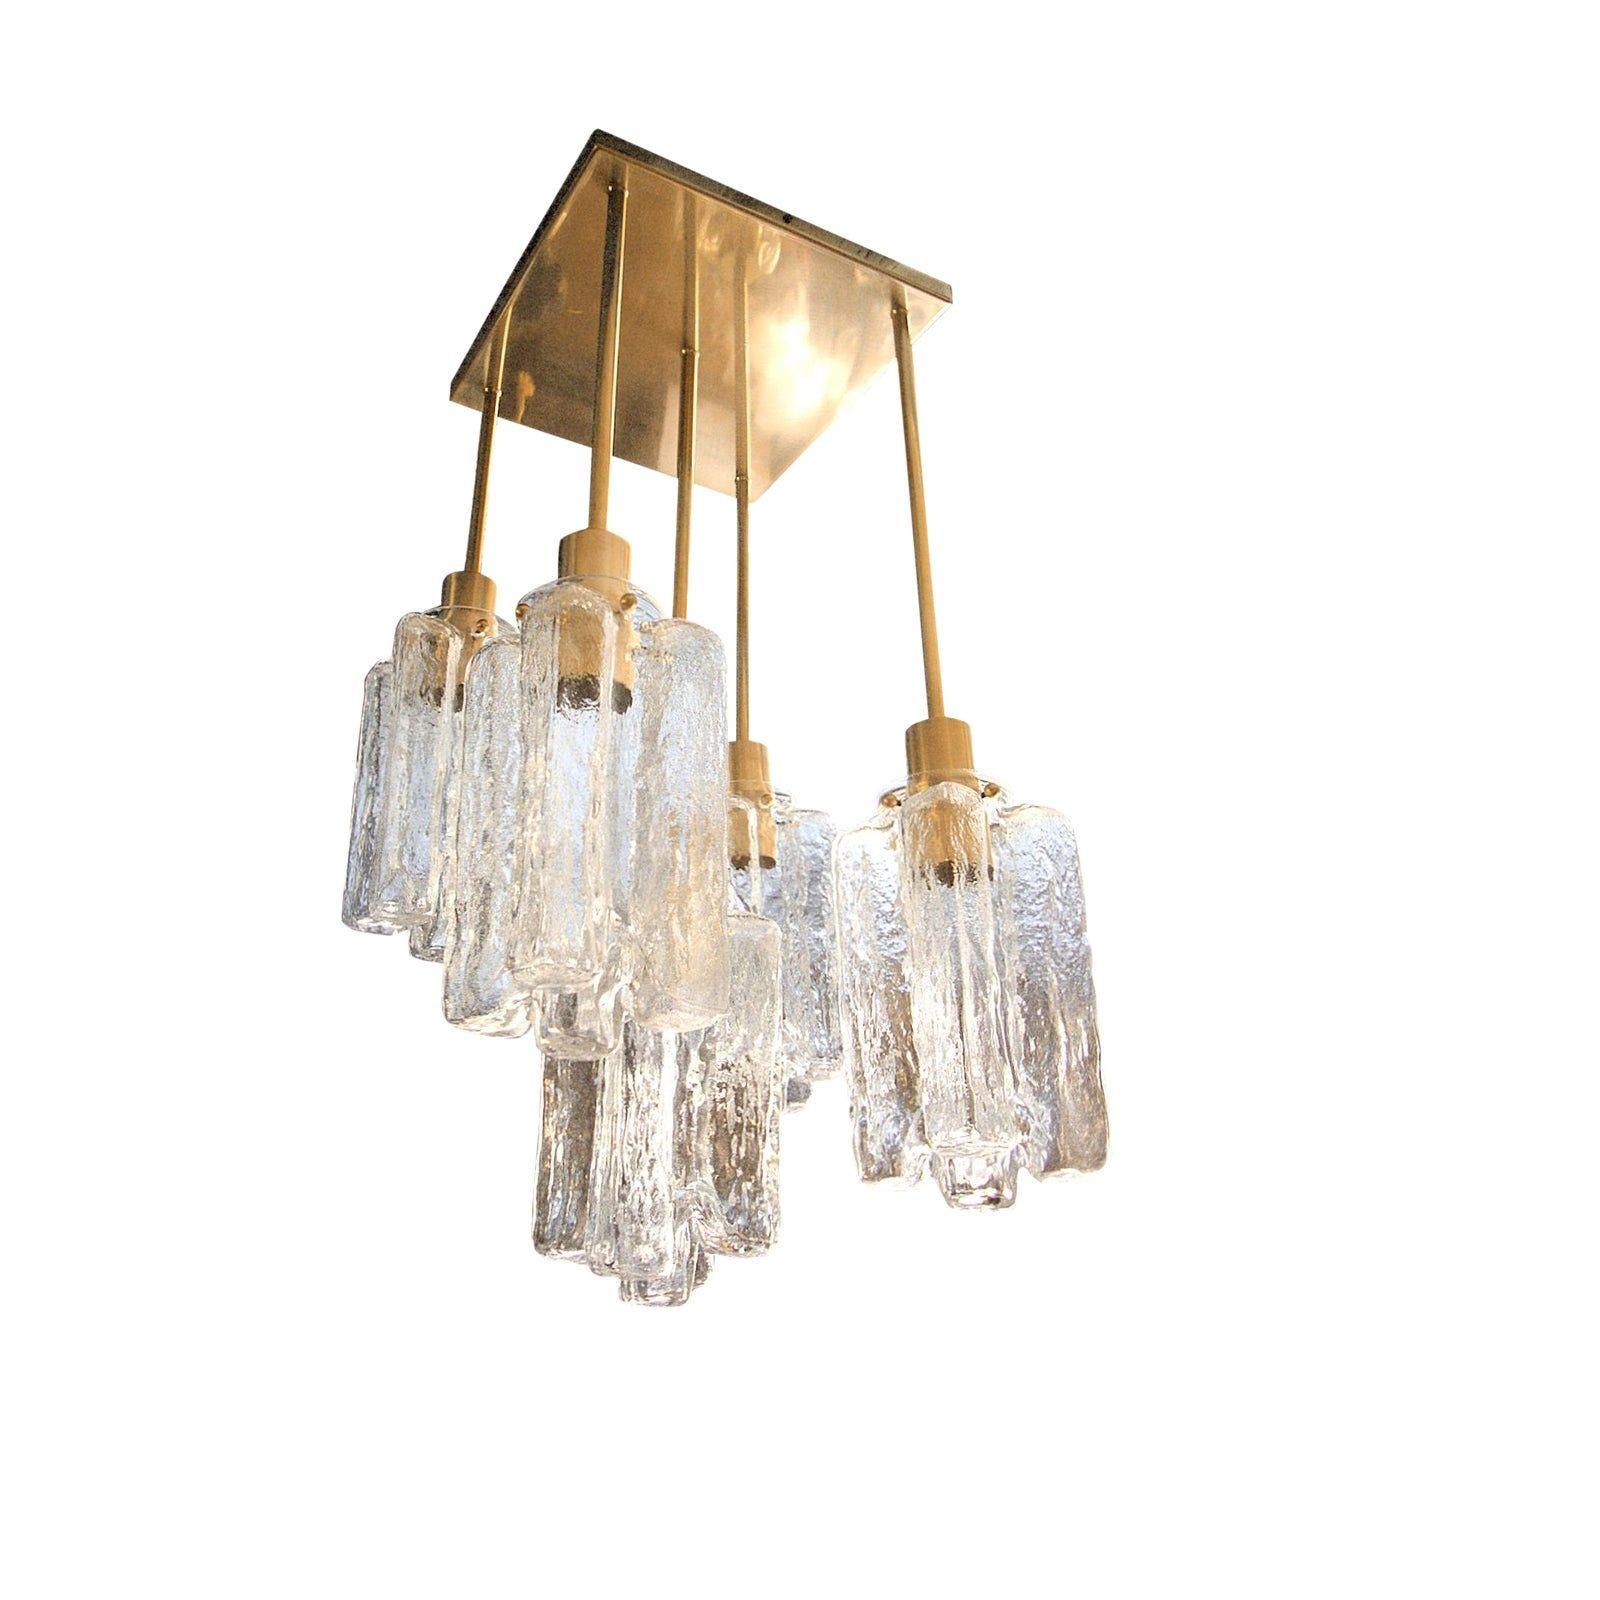 Mid Century Modern brass square flush mount chandelier, by Kalmar Austria 1960s.

The Murano glasses were made in Italy.

Handmade clear and textured Murano glass shades and polished brass mounts, flush mount ceiling light,

The brass ceiling plate